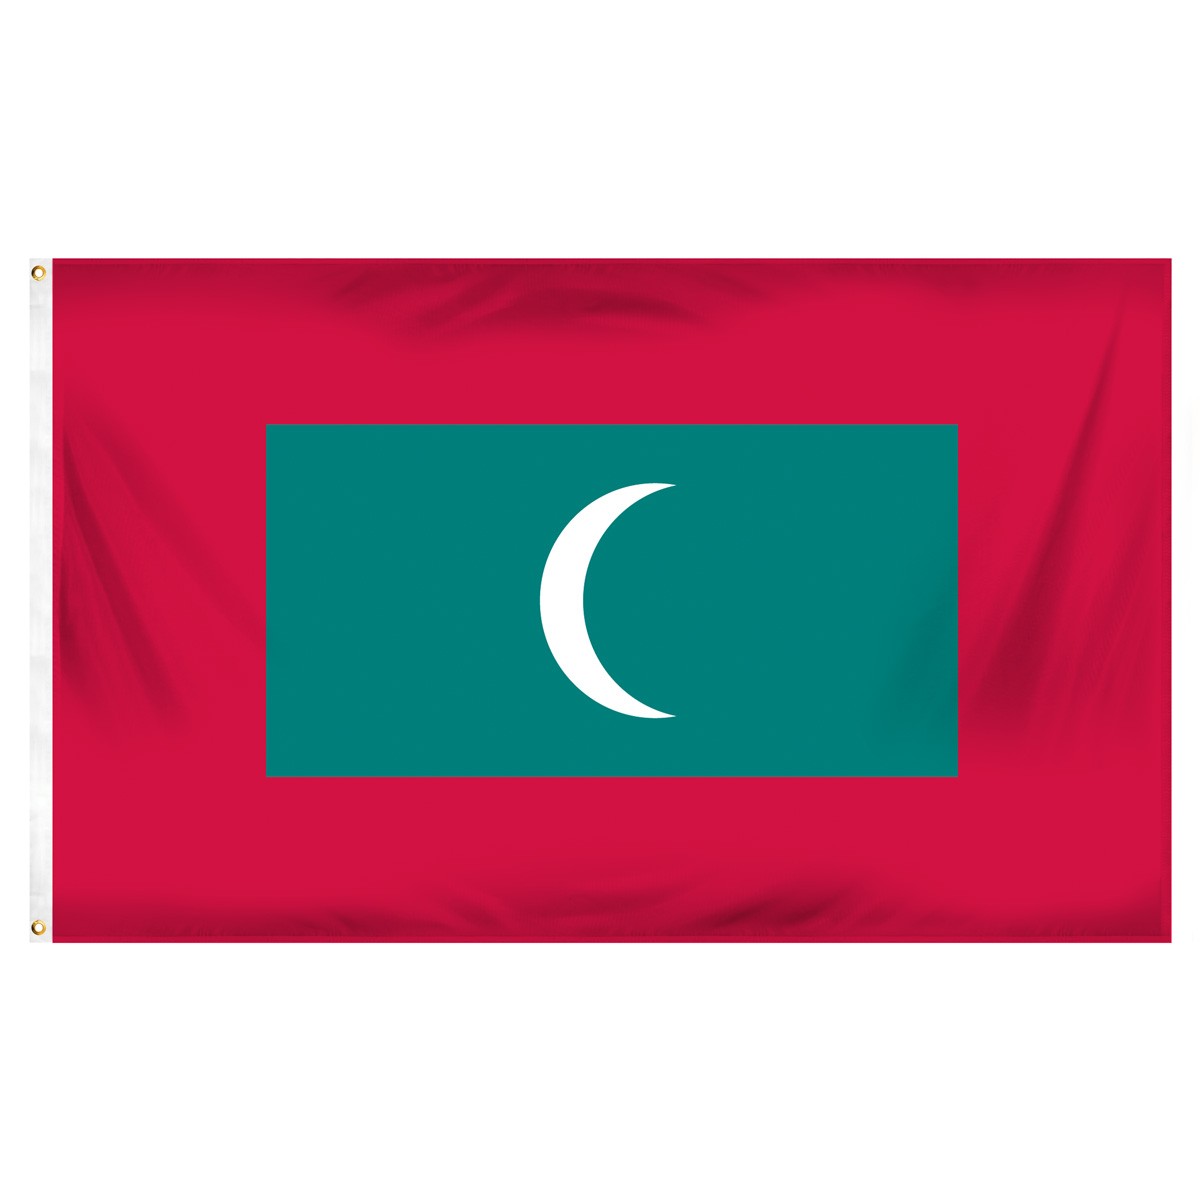 Maldives Posters and Banners